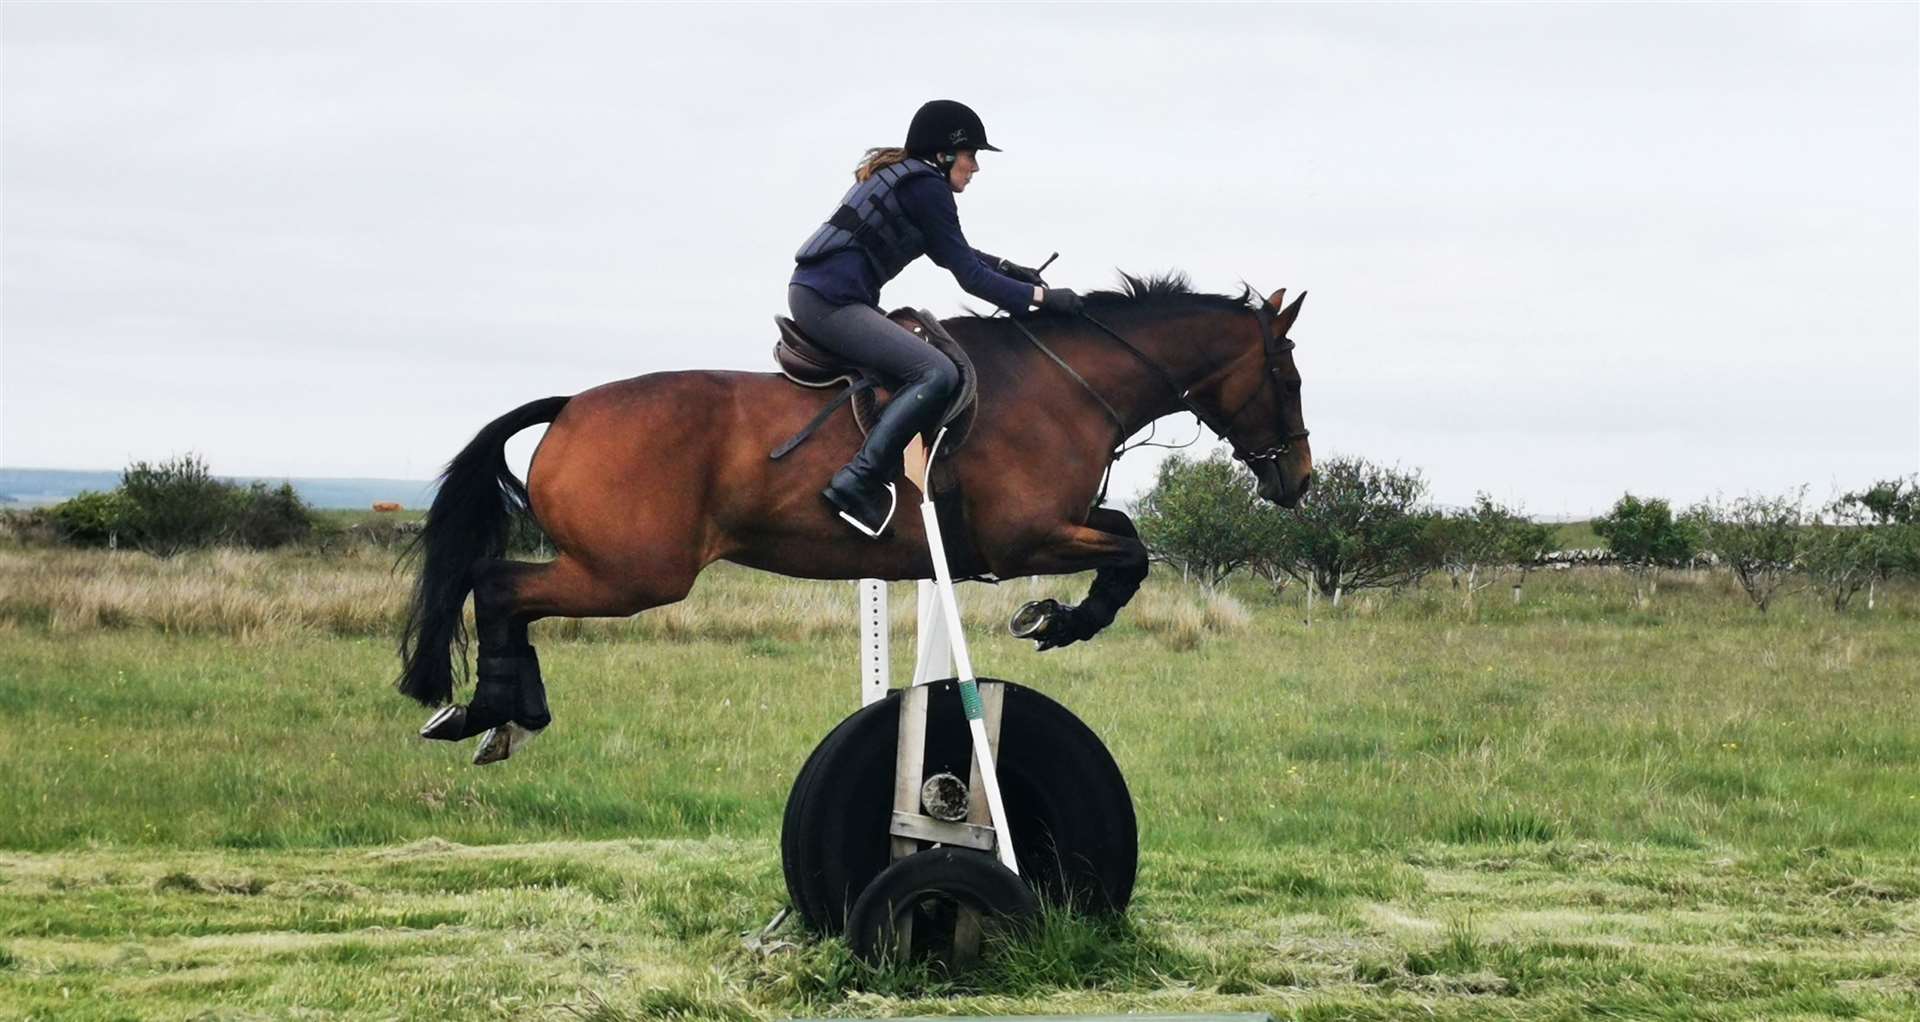 Mary Miller and Poppy get on with training for their next competition during the Caithness Riding Club camp at the weekend. Picture Marina Kempton